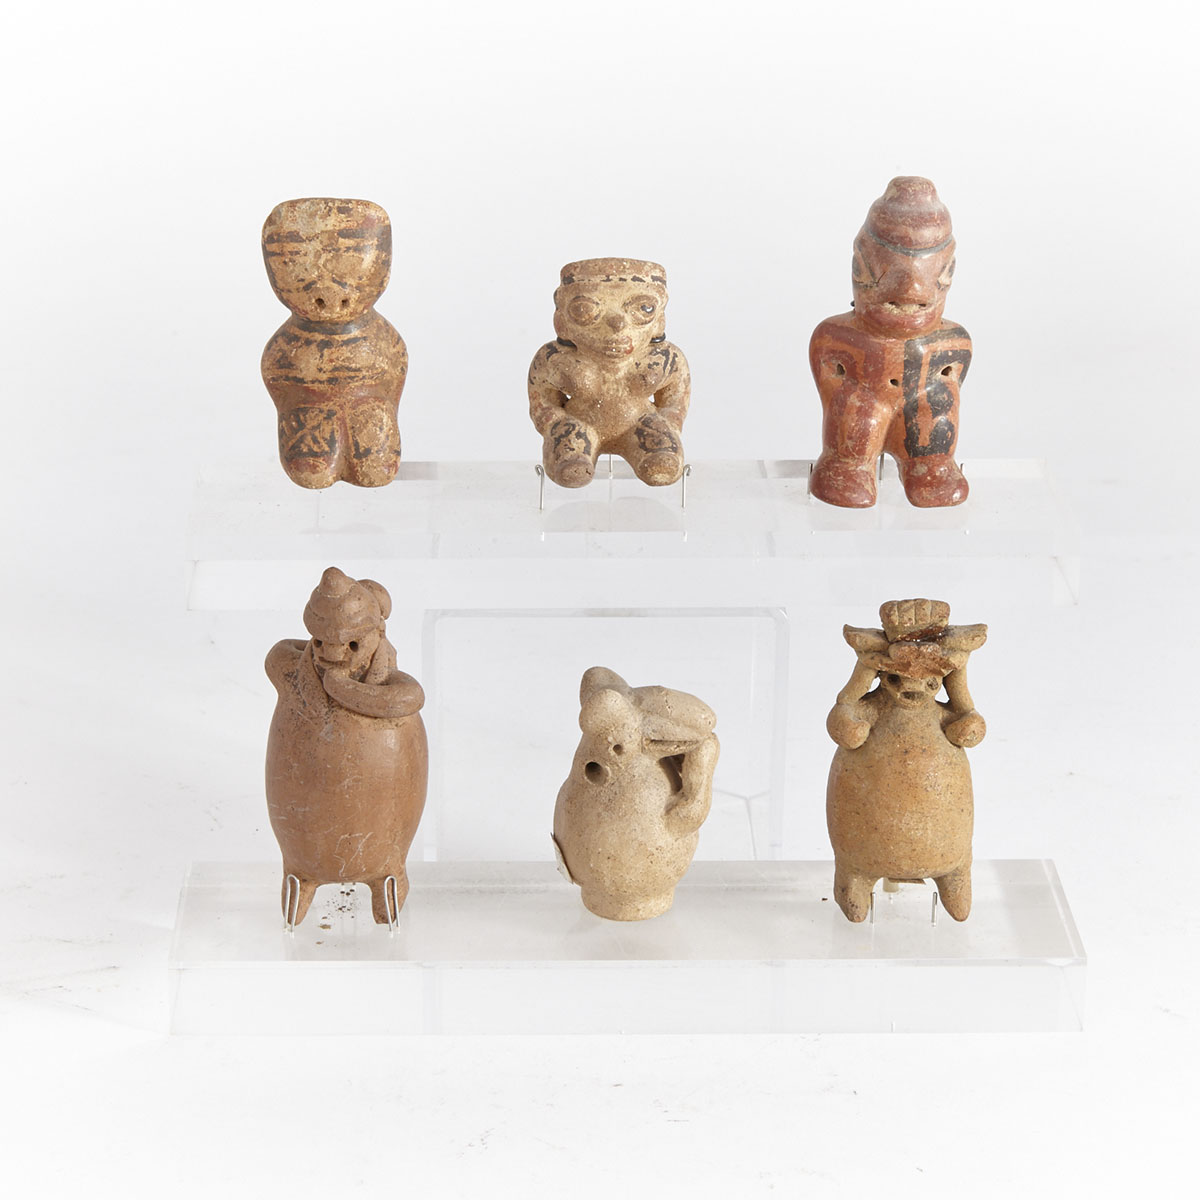 Group of Six Guanacaste Pottery Figures, Early Classic Period, 300 B.C. - 300 A.D.